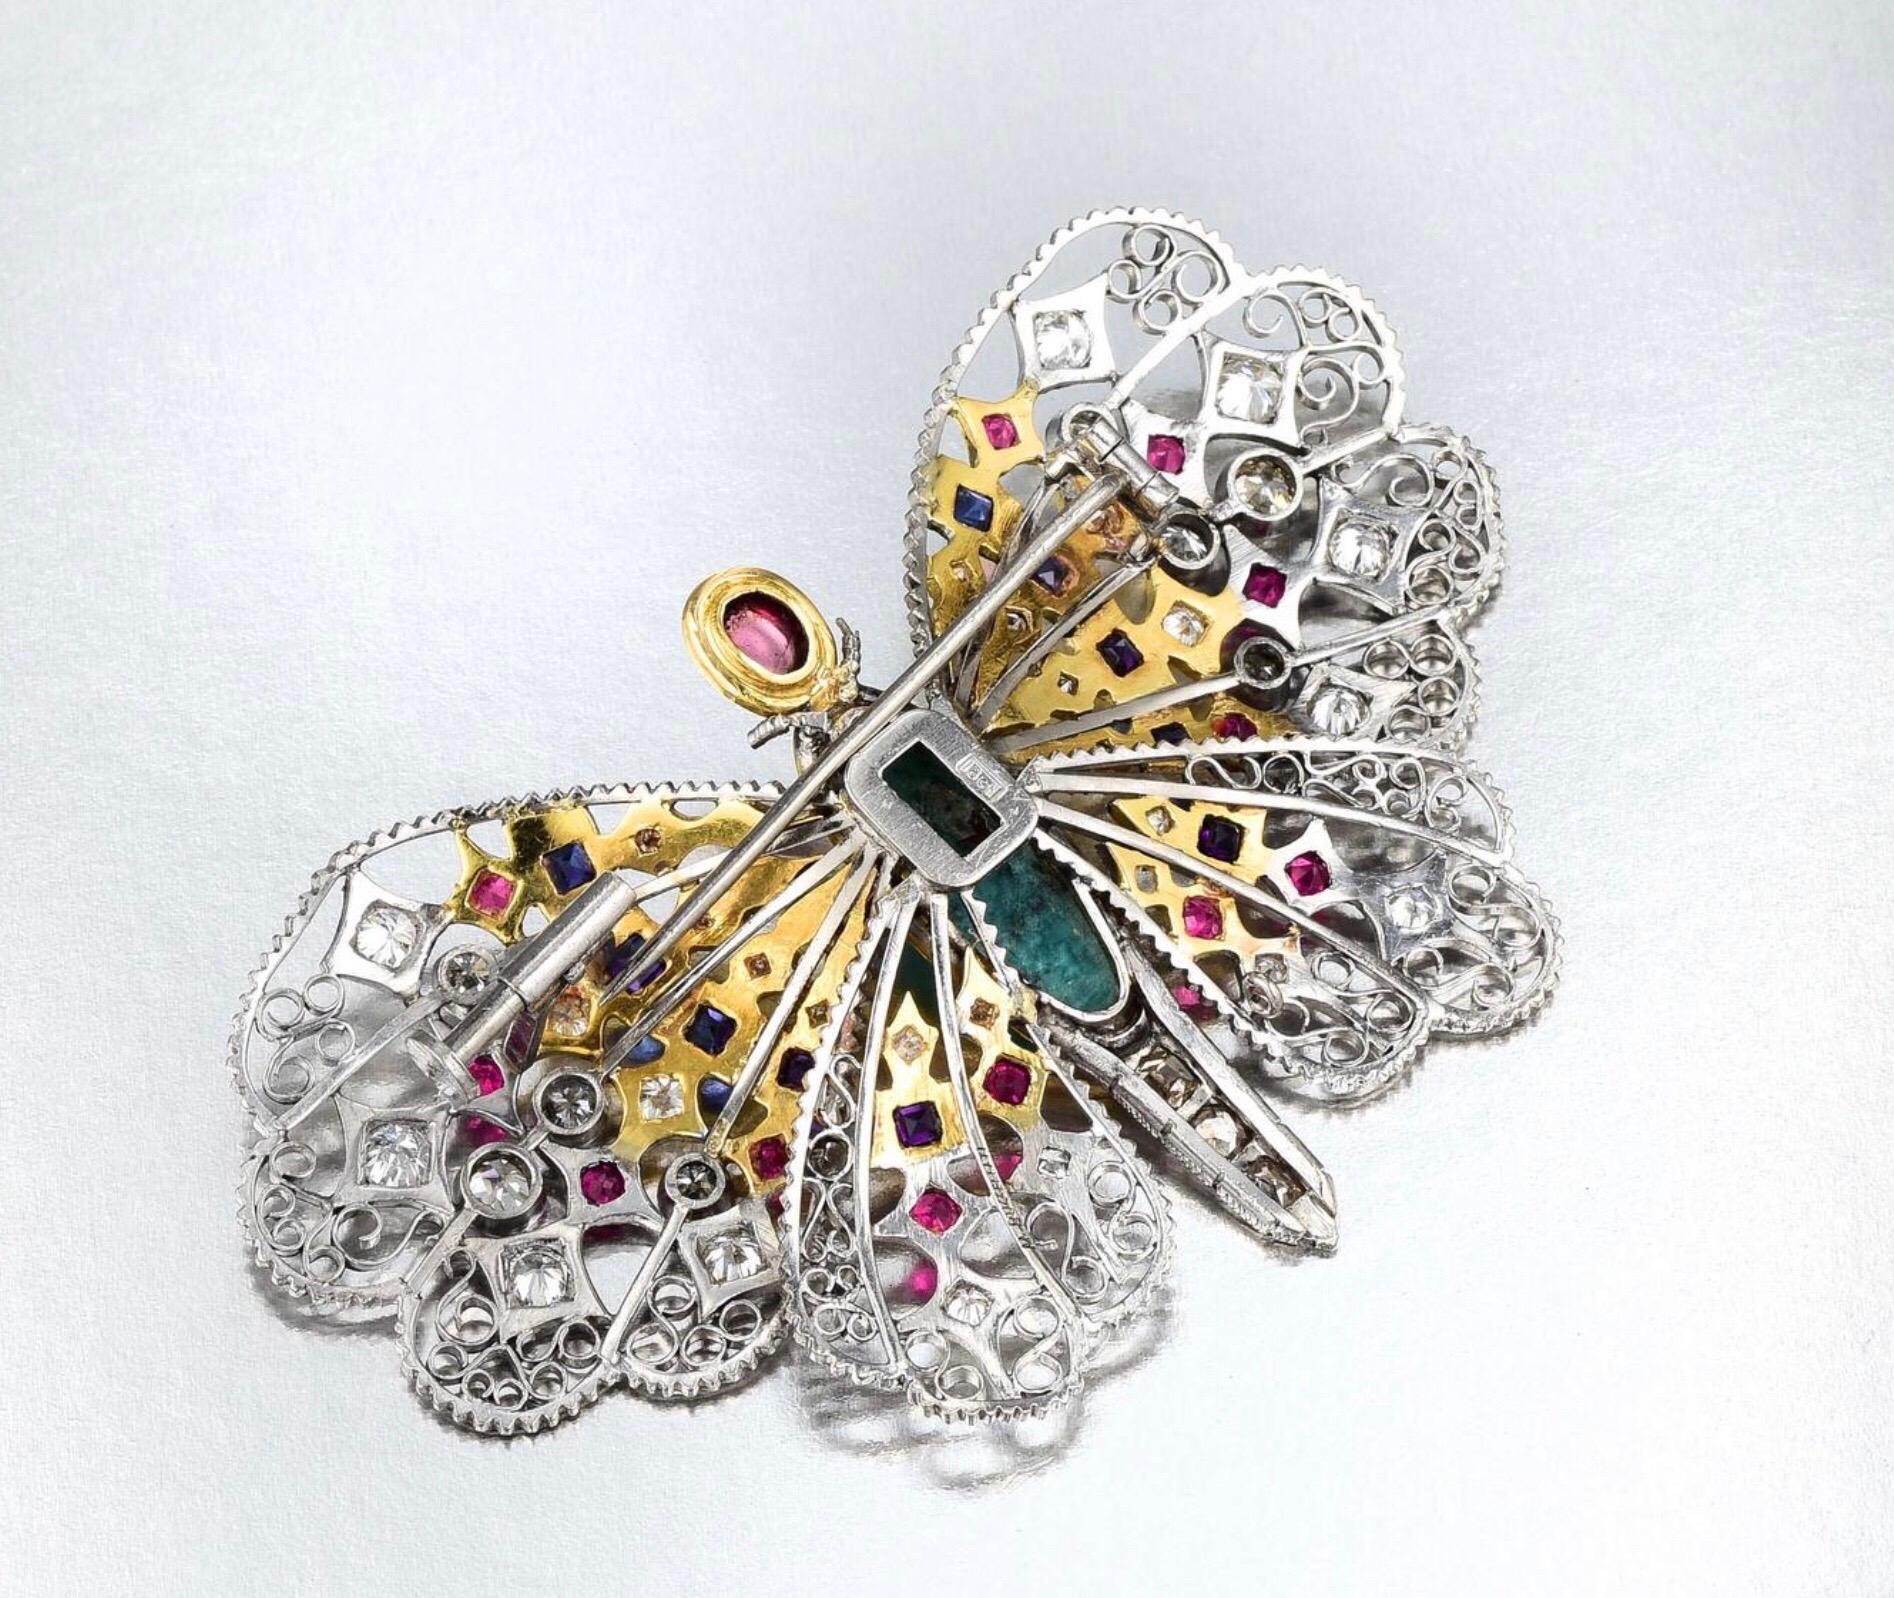 Crafted in 18K white and yellow gold, featuring a turquoise cabochon body; the wings enhanced by 12 round-cut rubies weighing approximately 0.60 carat, 10 square-cut sapphires weighing approximately 0.85 carat, 

36 single- and old European-cut